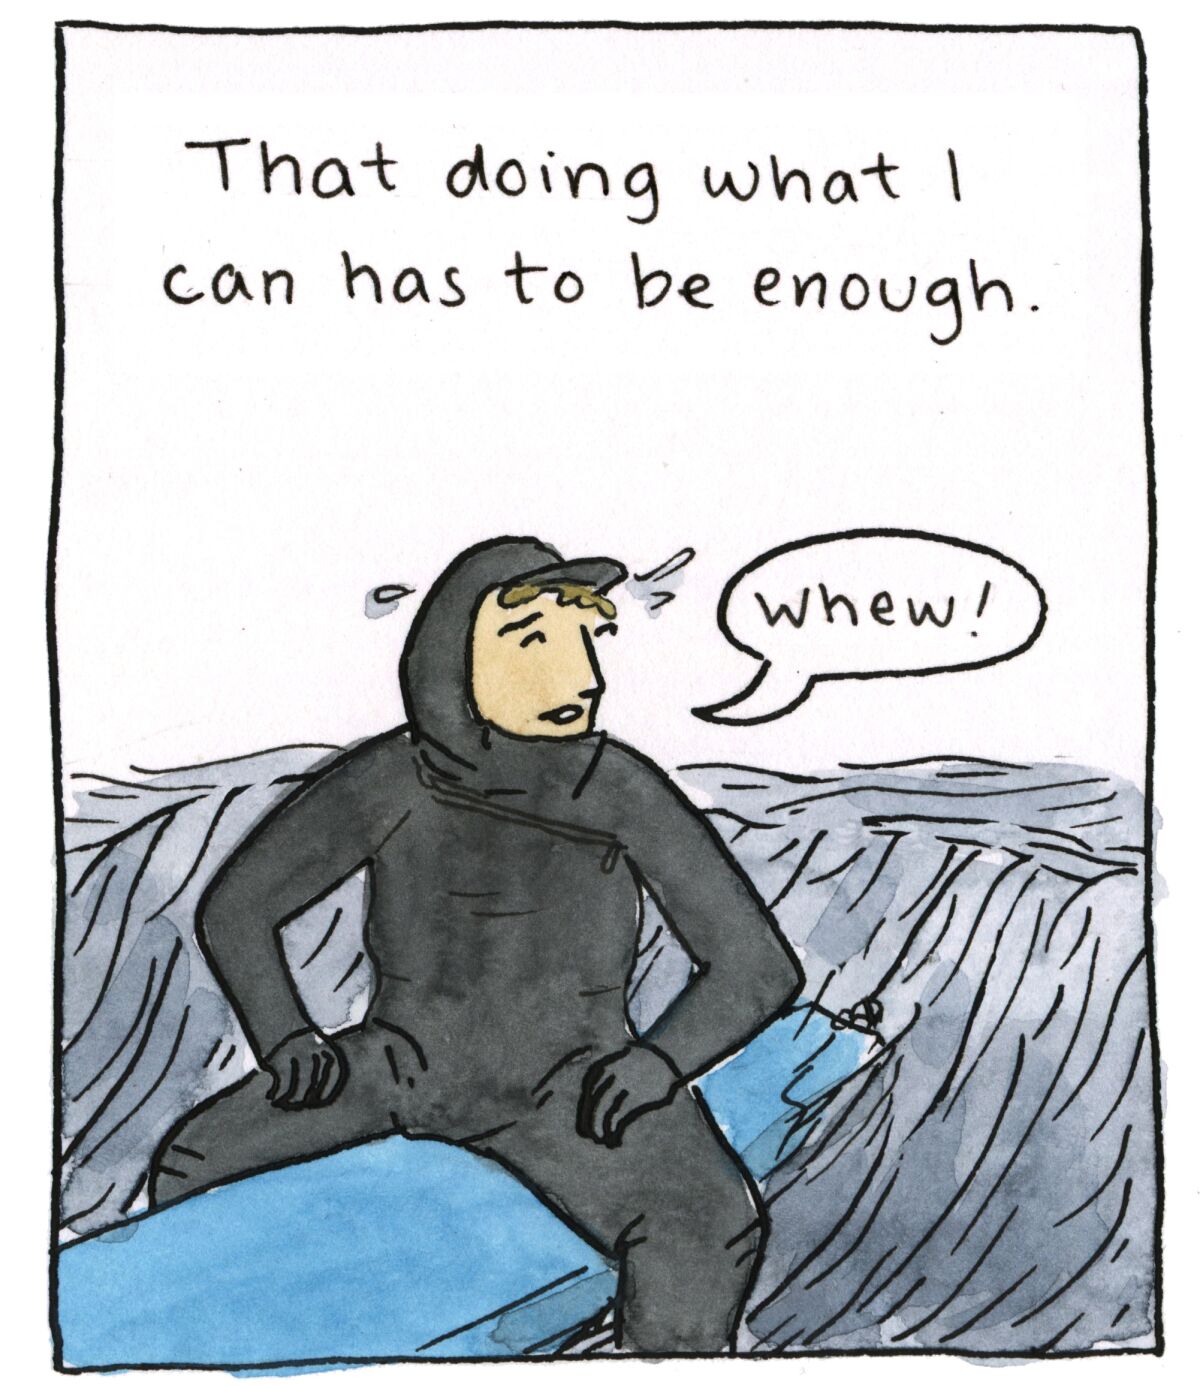 An illustration of a person in a wetsuit on a surfboard. The panel says: 'That doing what I can has to be enough.'